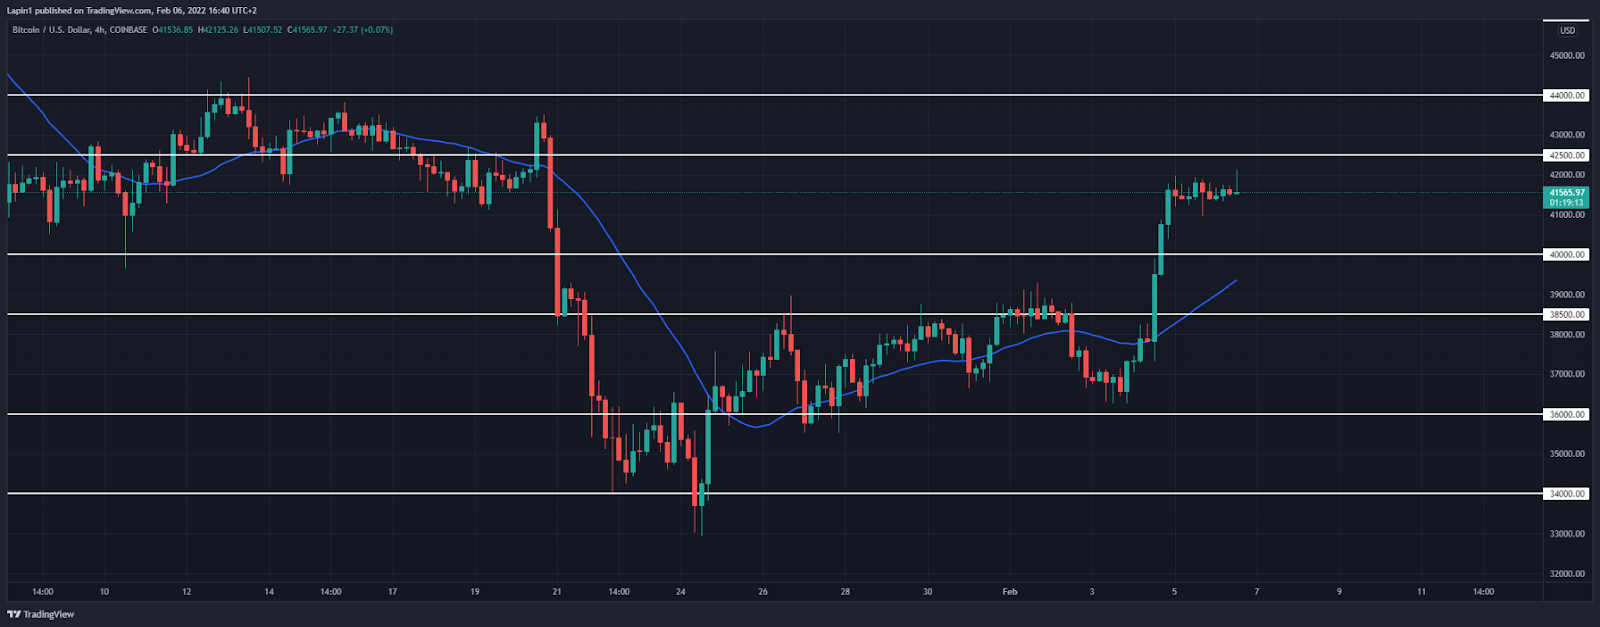 Bitcoin price analysis: BTC rejects upside at $42,000 again, ready to drop?